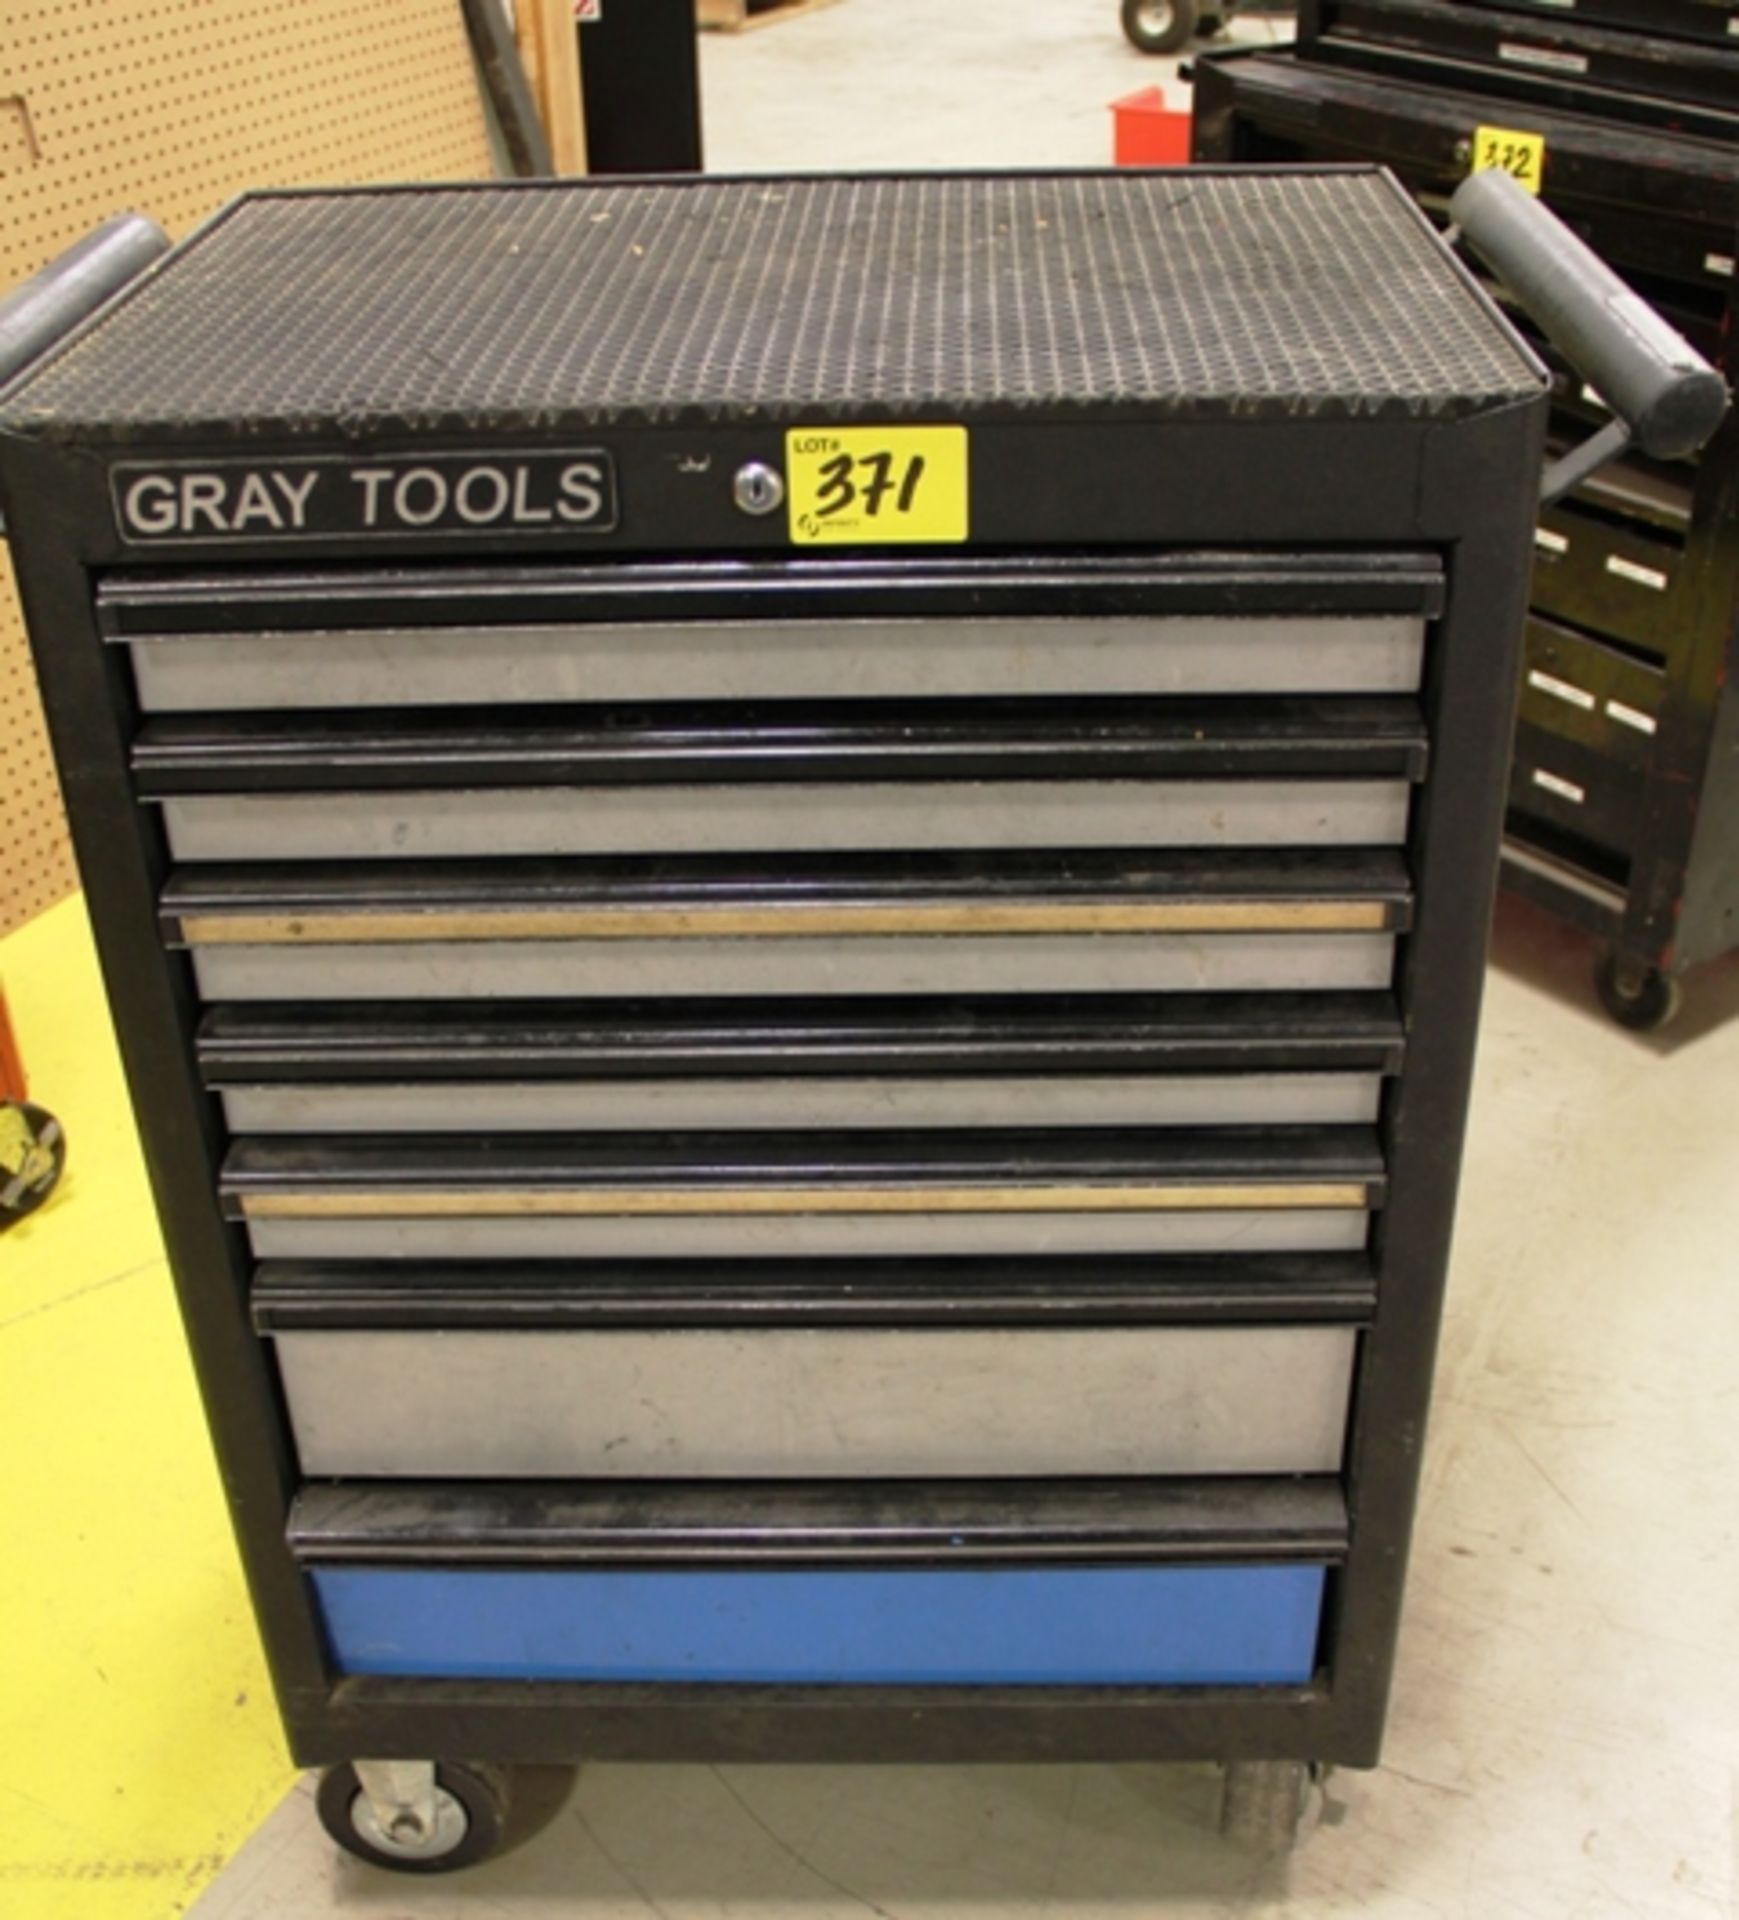 GRAY TOOLS PORTABLE TOOL CHEST